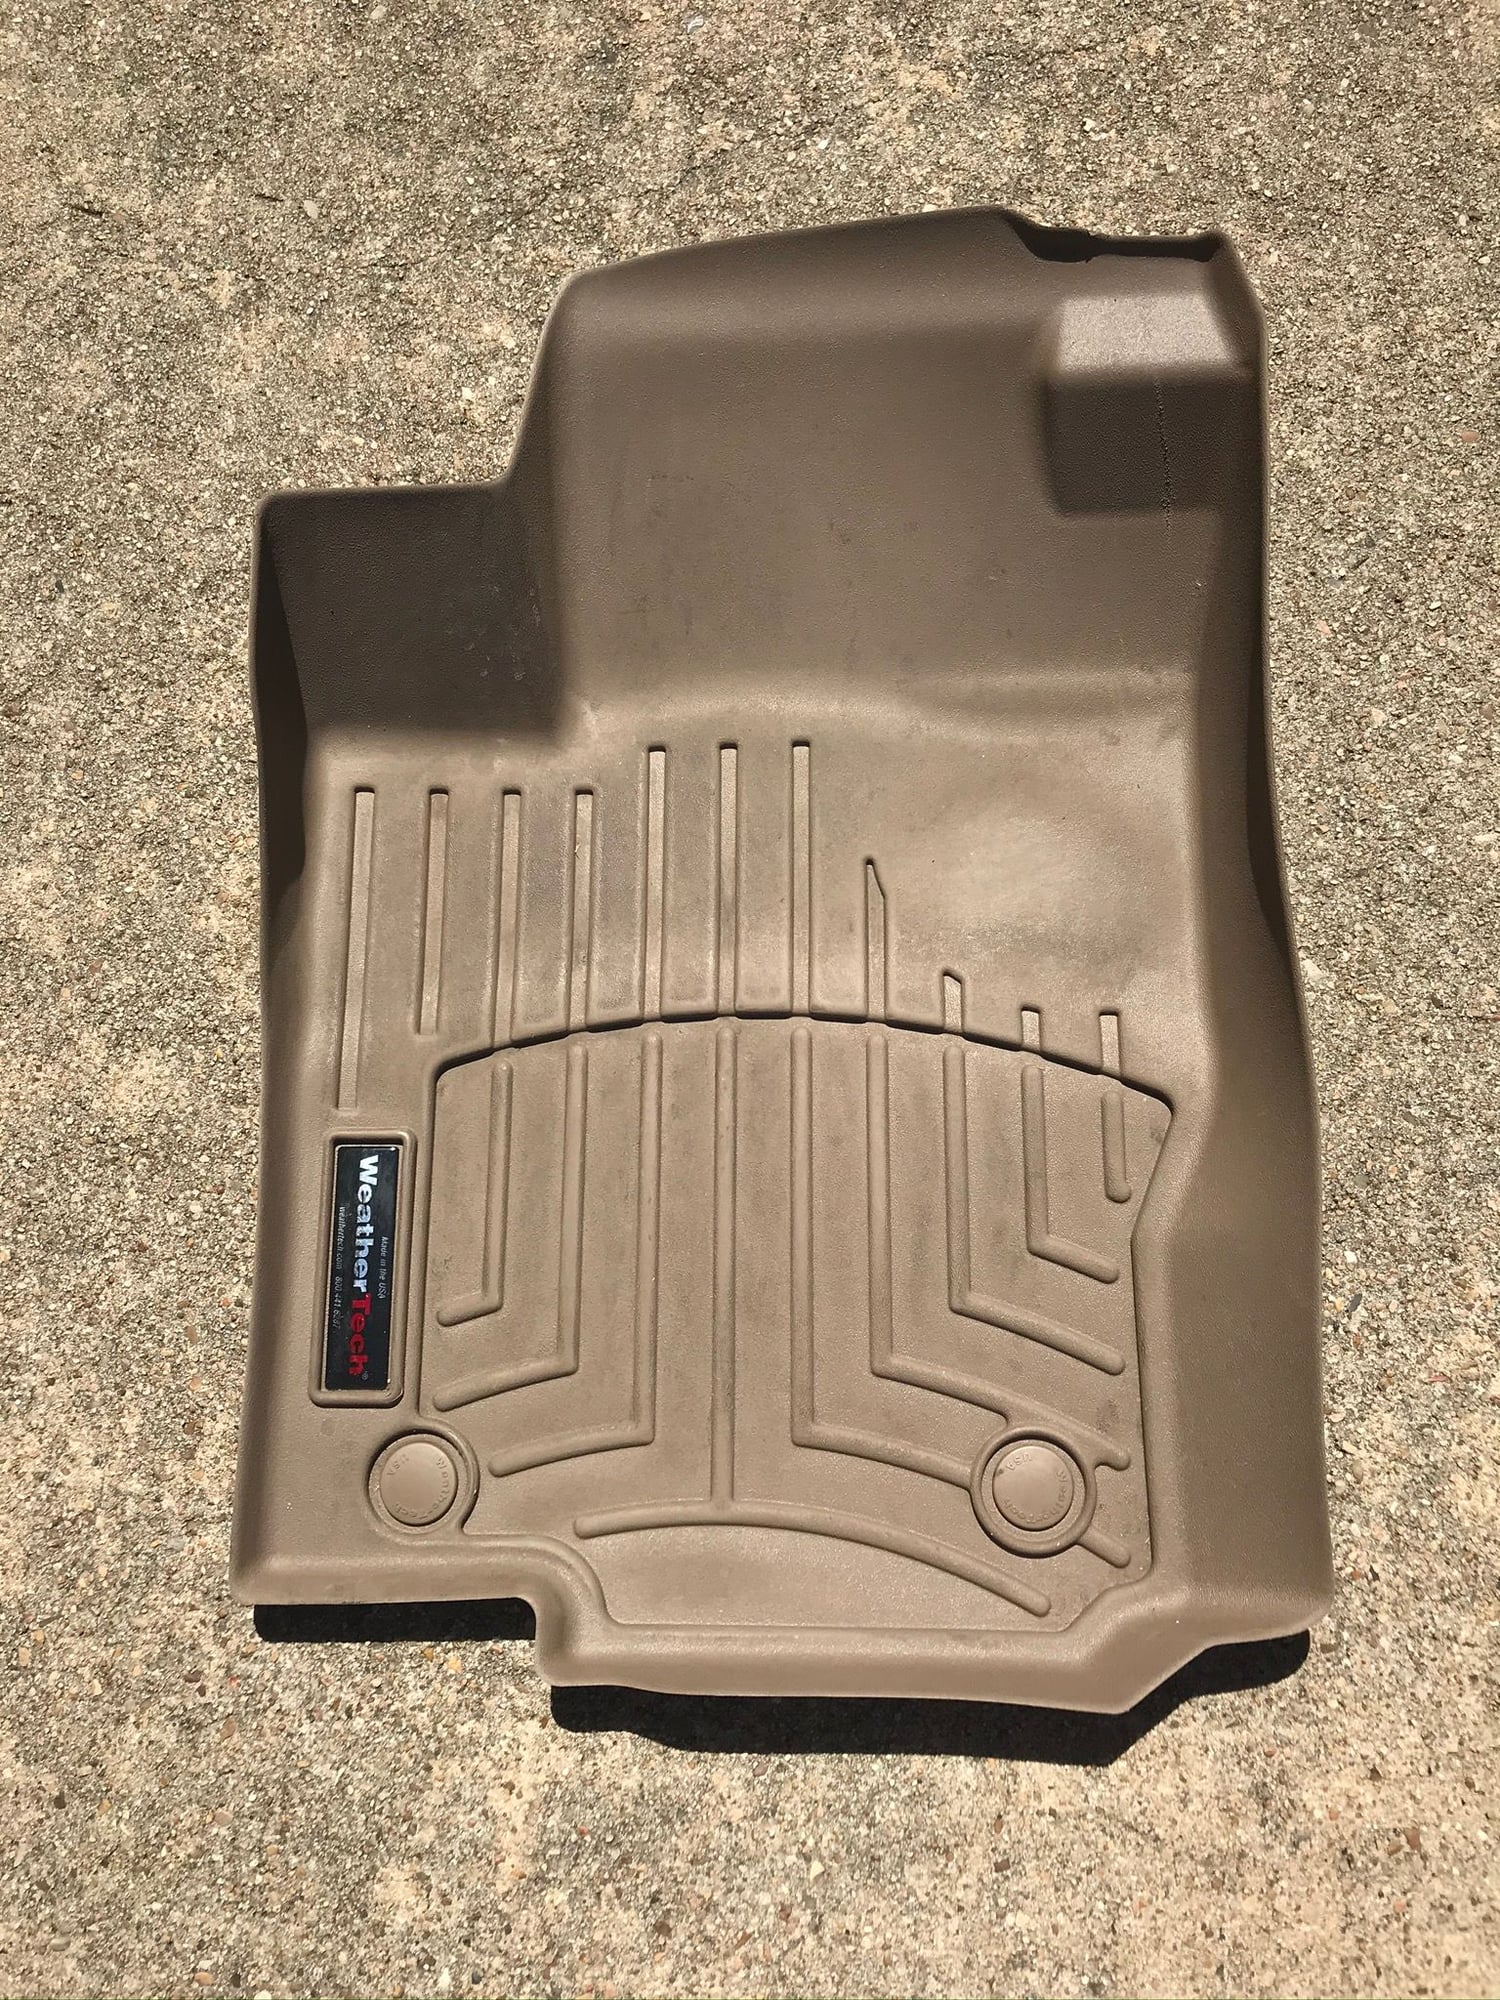 Interior/Upholstery - Weathertech liners for Mercedes GL & GLS class - Used - 2013 to 2019 Mercedes-Benz GL450 - 2013 to 2019 Mercedes-Benz GL550 - 2013 to 2019 Mercedes-Benz GL350 - Sugar Land, TX 77479, United States